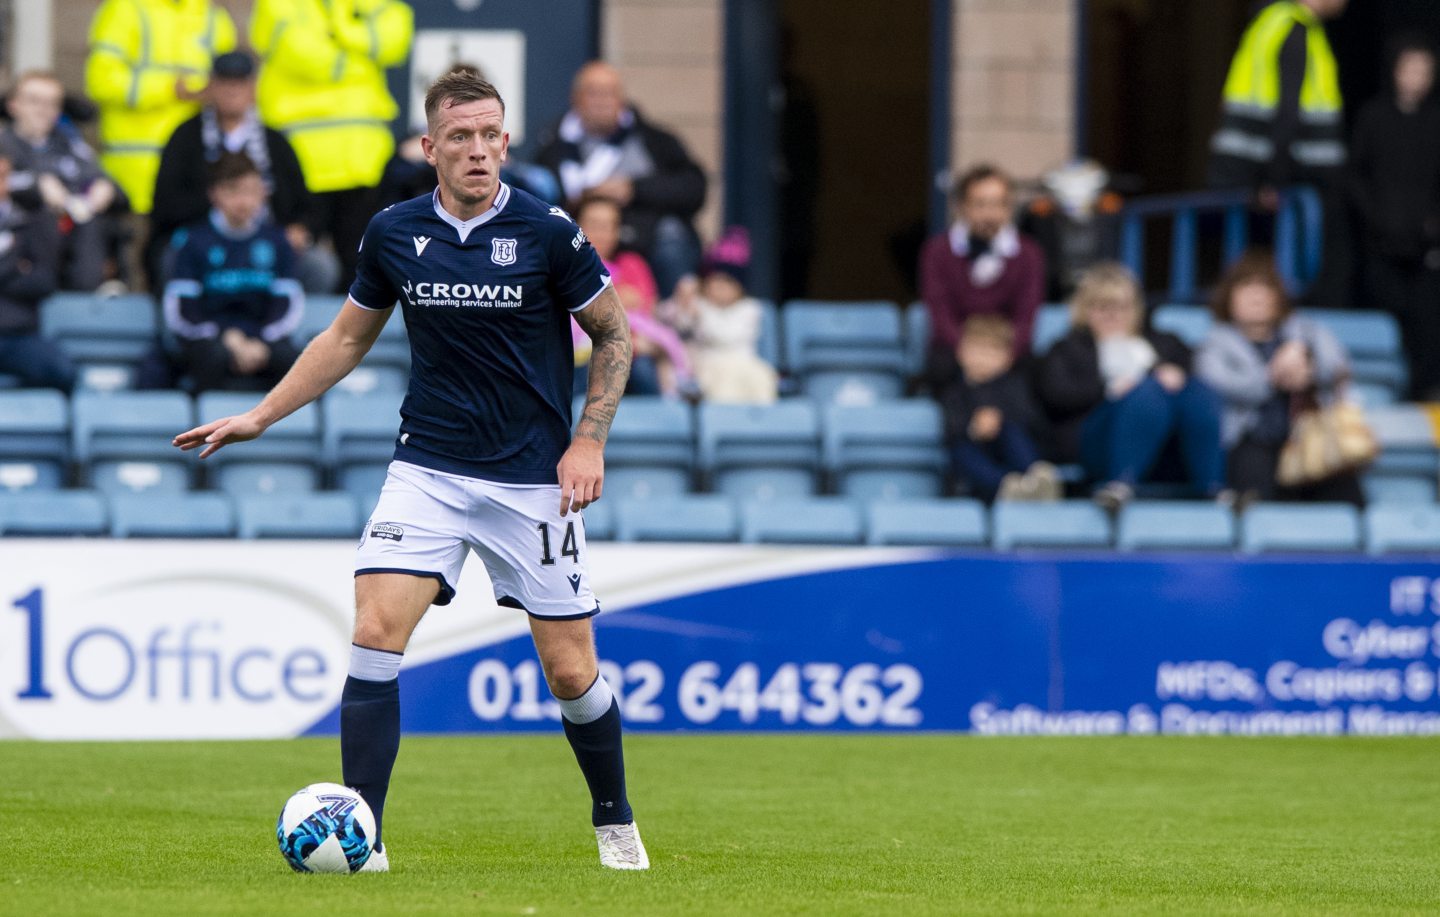 Lee Ashcroft knows Dundee will be in for a challenge this season.